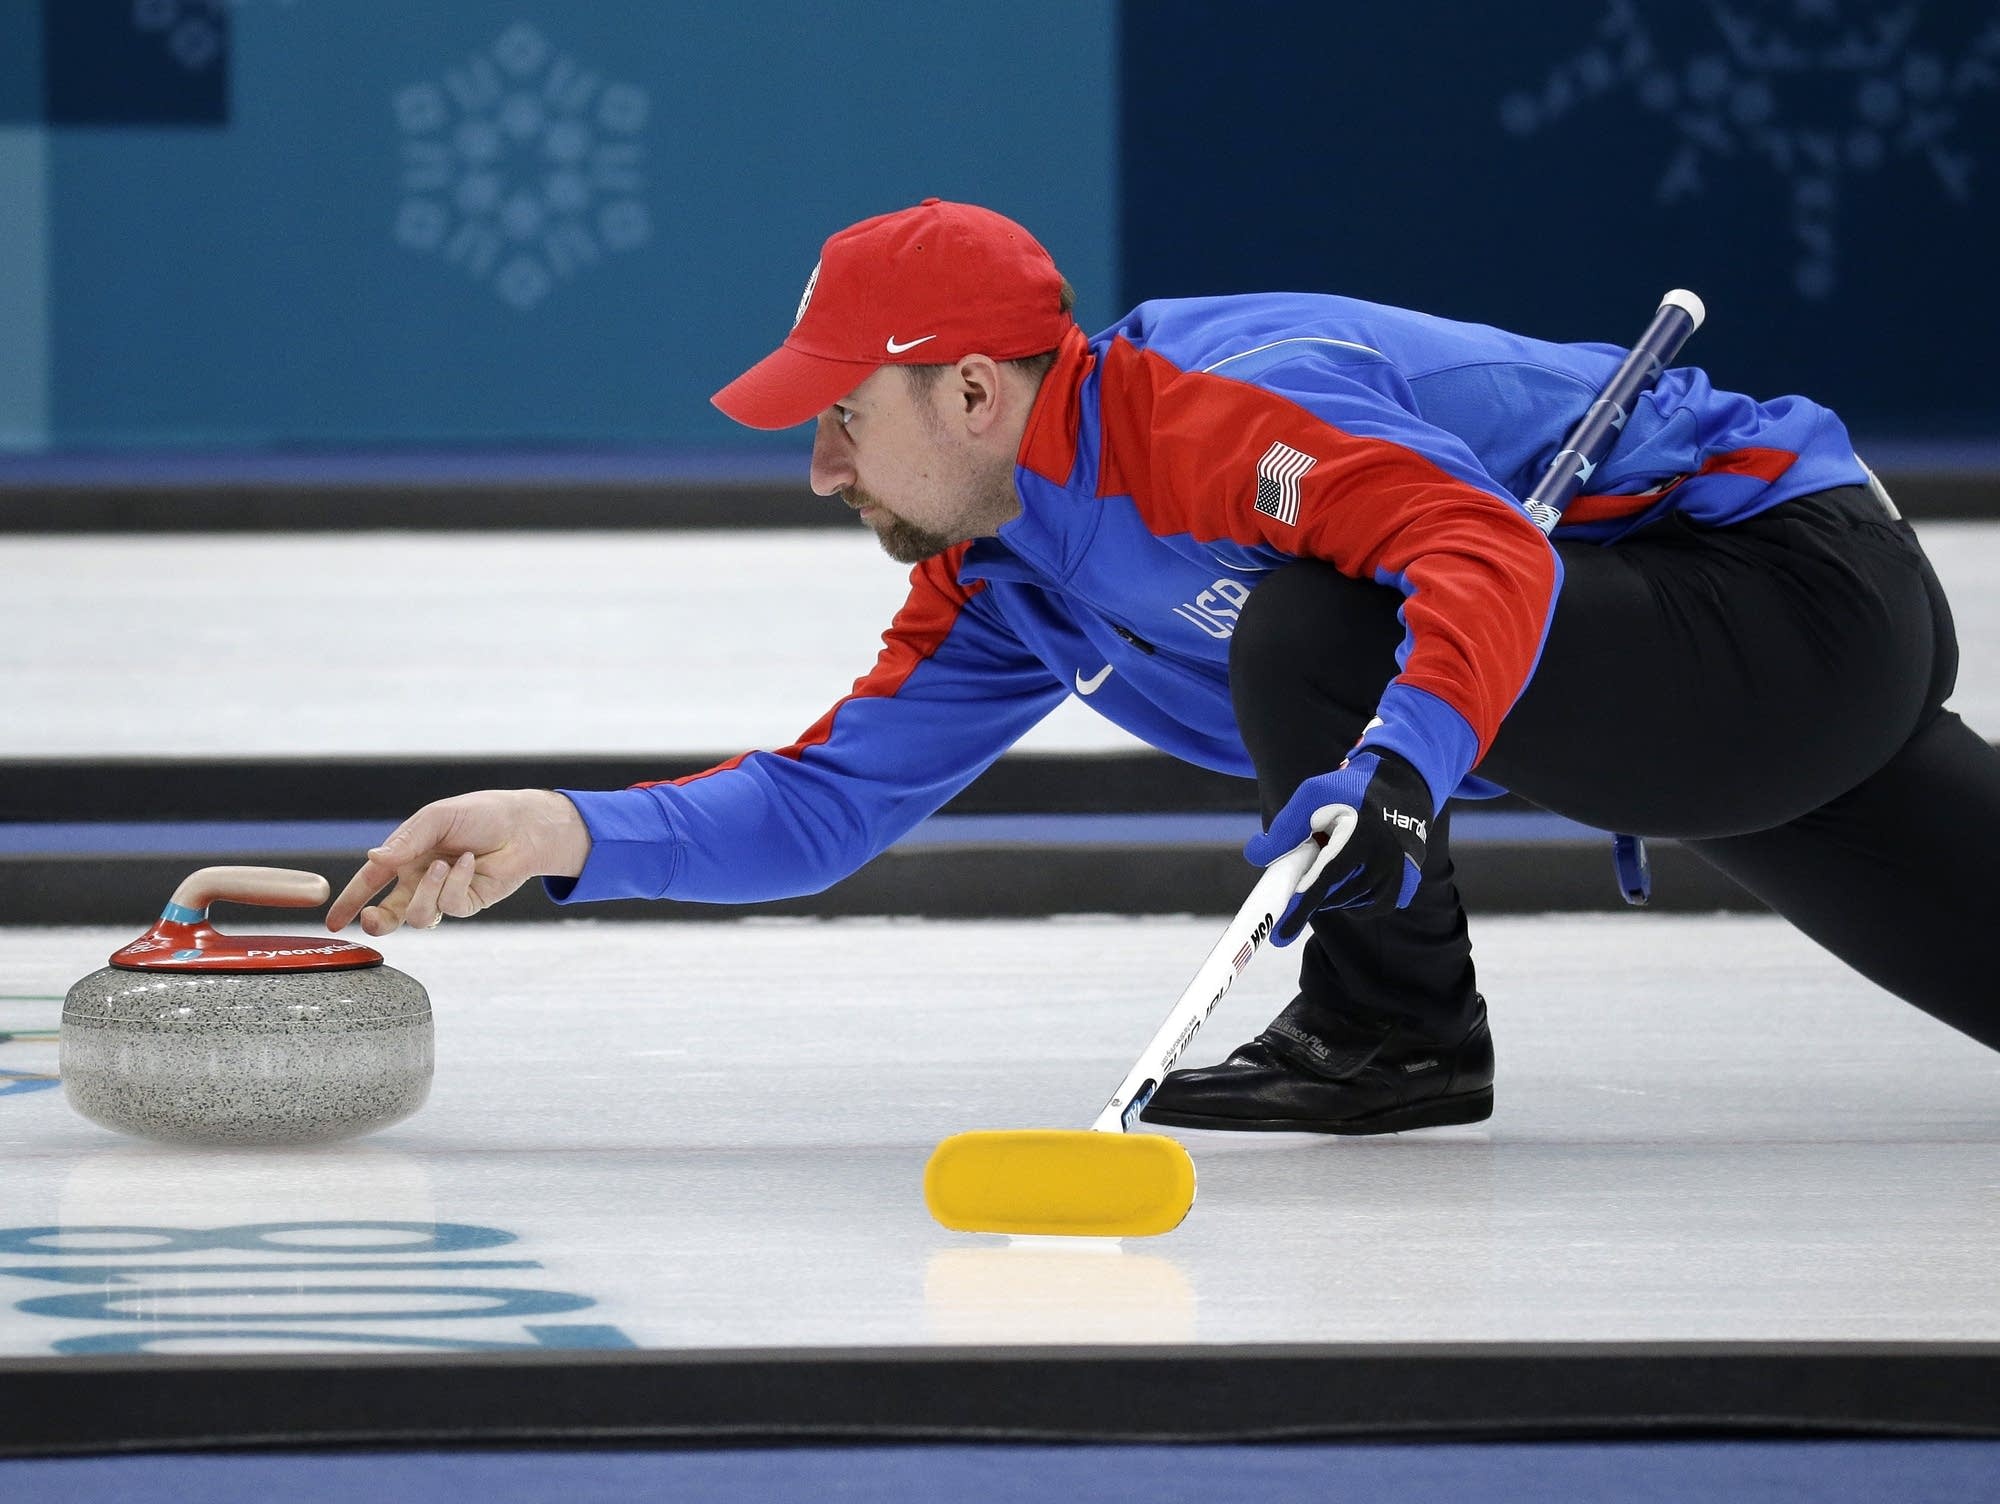 Curling: Joe Polo of the United States launches the stone during practice at the 2018 Winter Olympics in Gangneung. 2000x1510 HD Wallpaper.